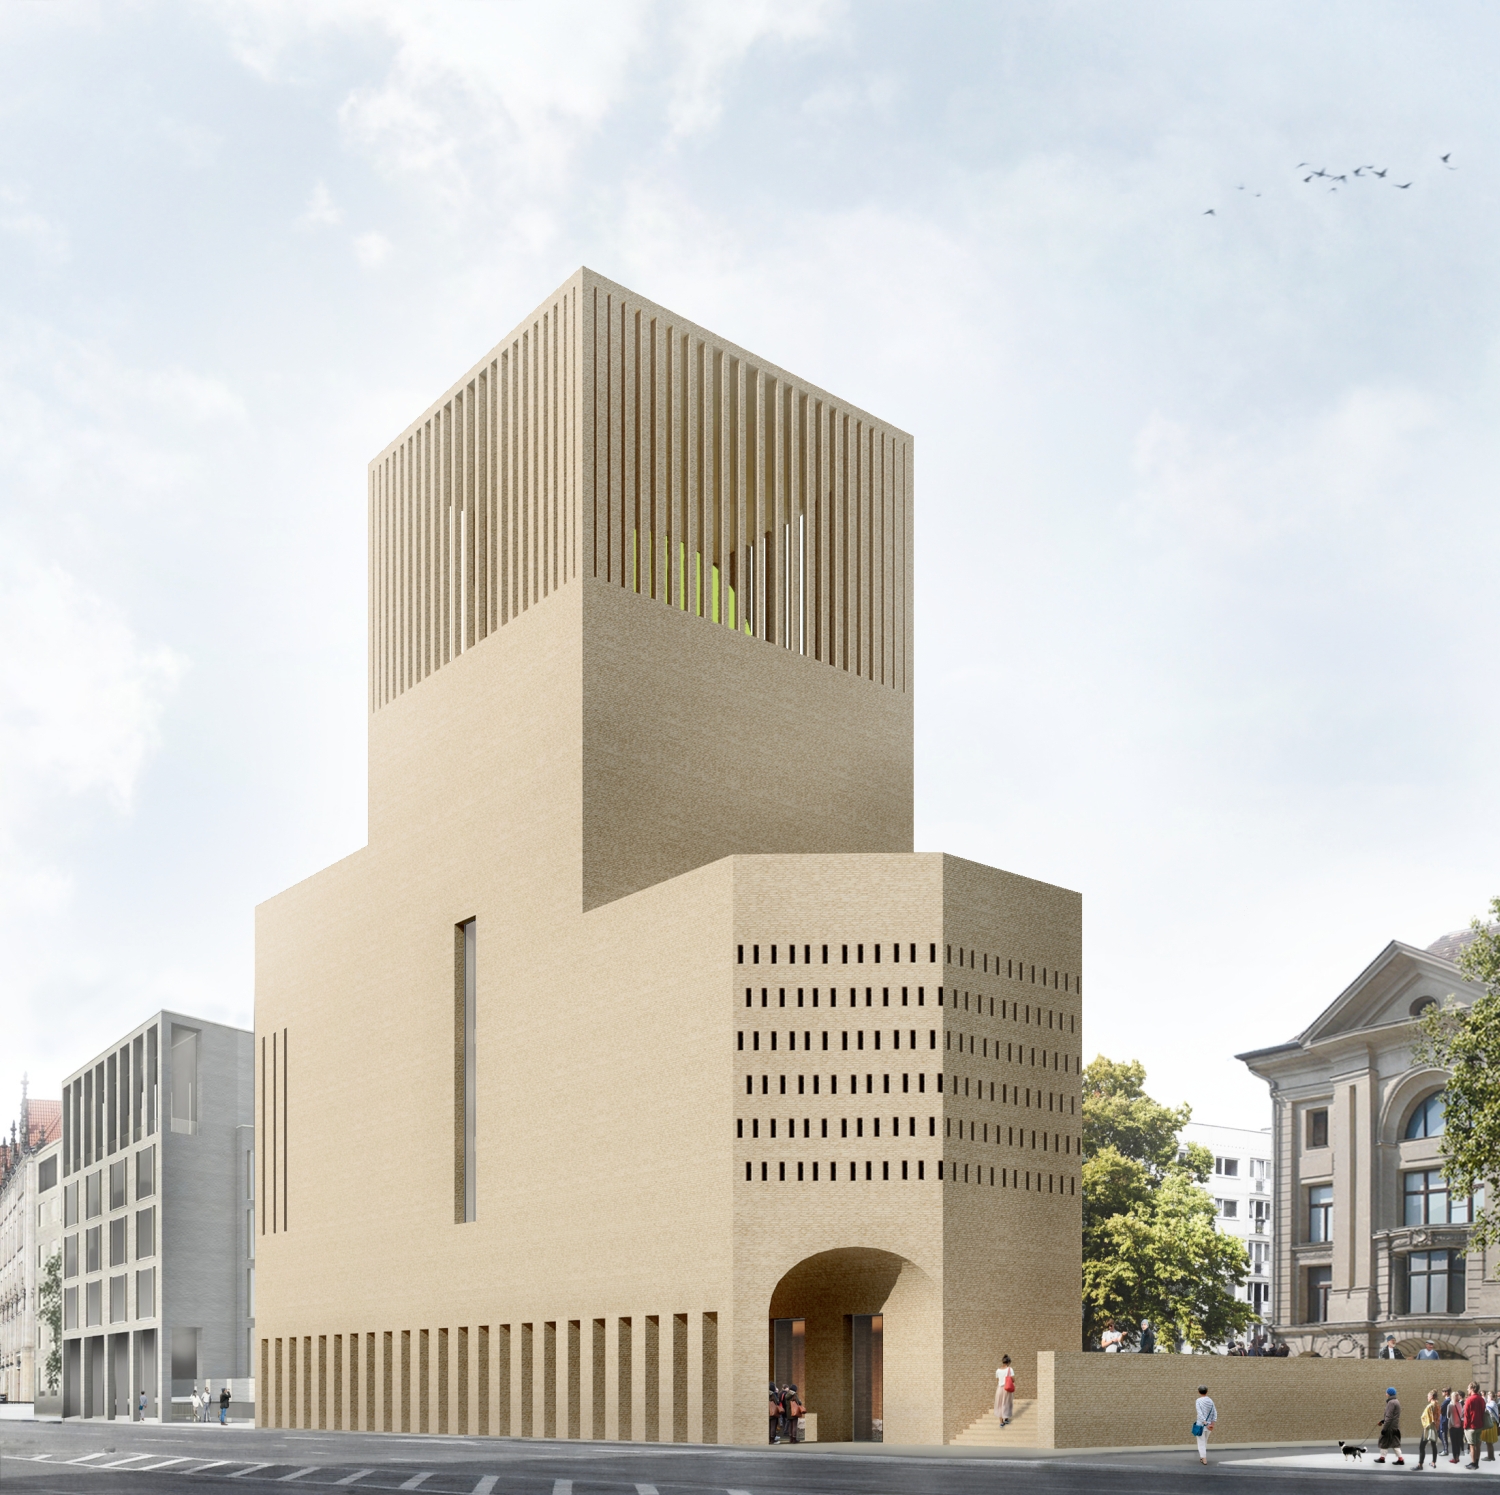 Architect's rendering of the exterior of the structure on&nbsp;Gertraudenstrasse